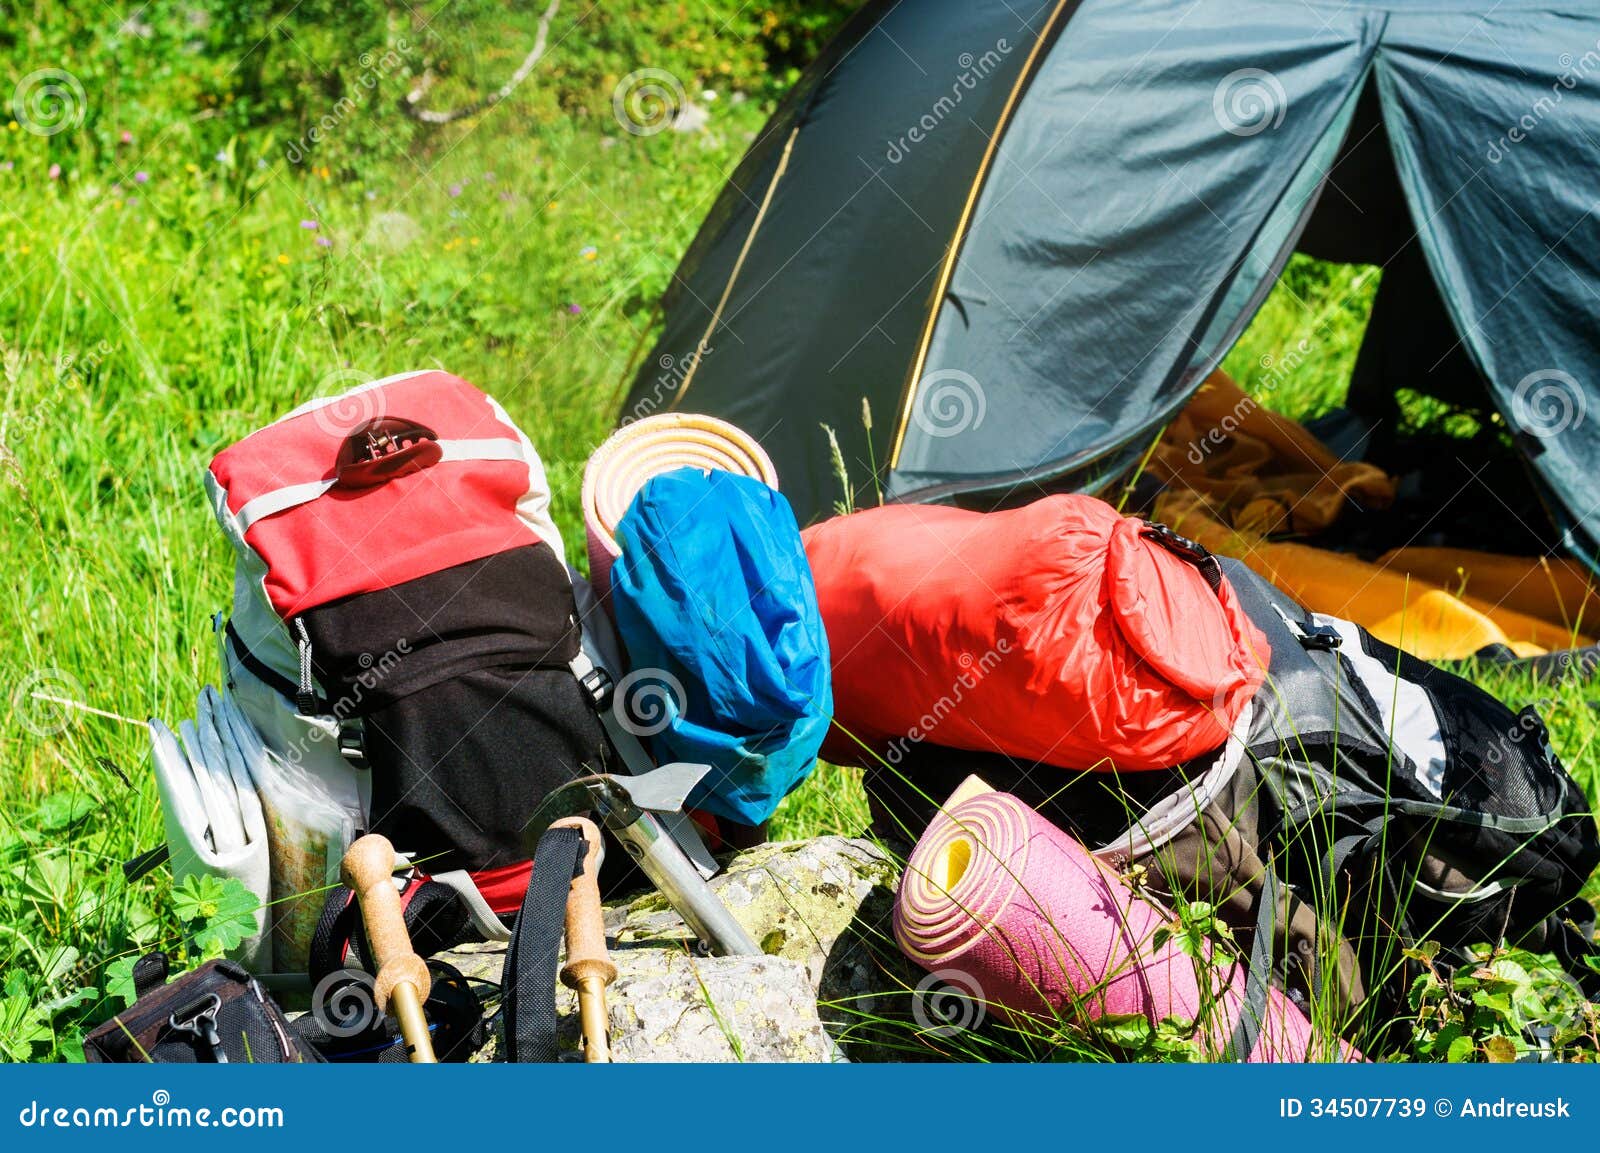 Camping outdoors stock image. Image of leisure, landscape - 34507739